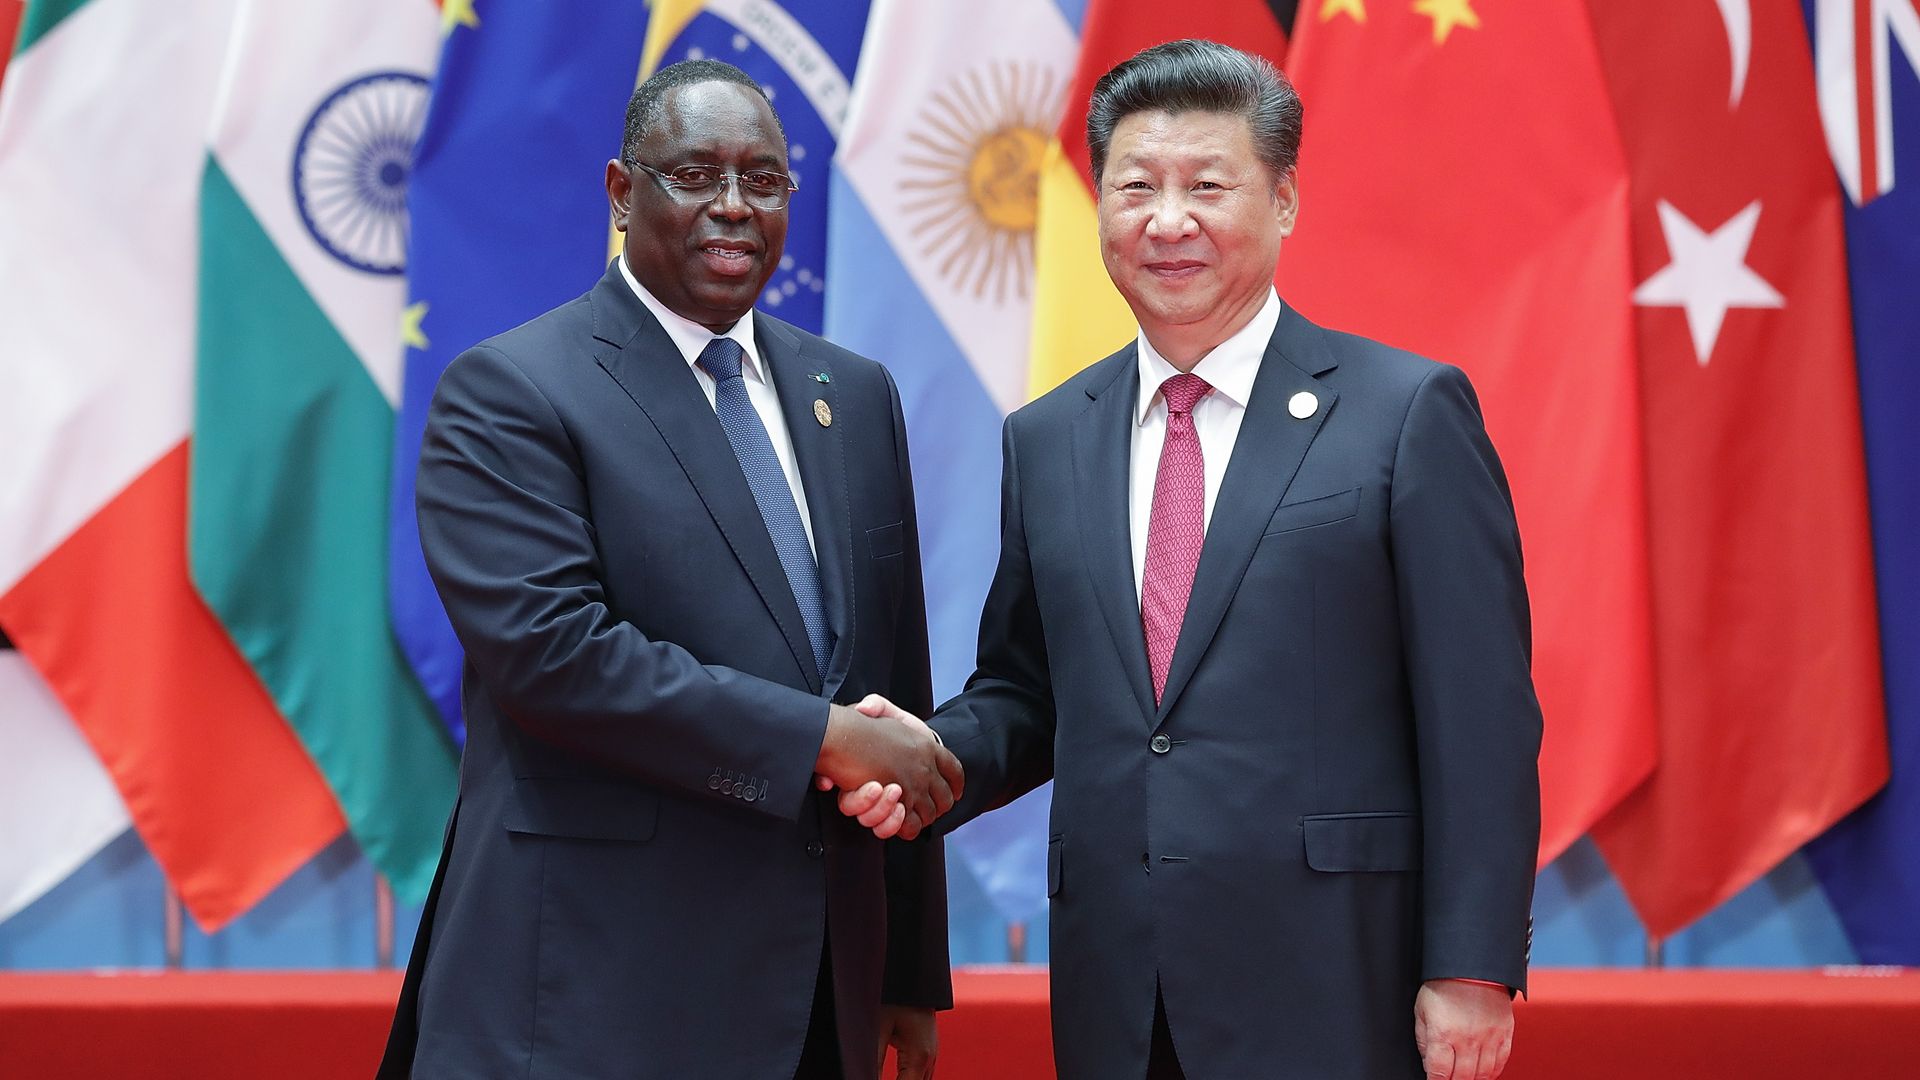 Chinese President Xi Jinping shakes hands with Senegalese President Macky Sall at the G20 Summit.